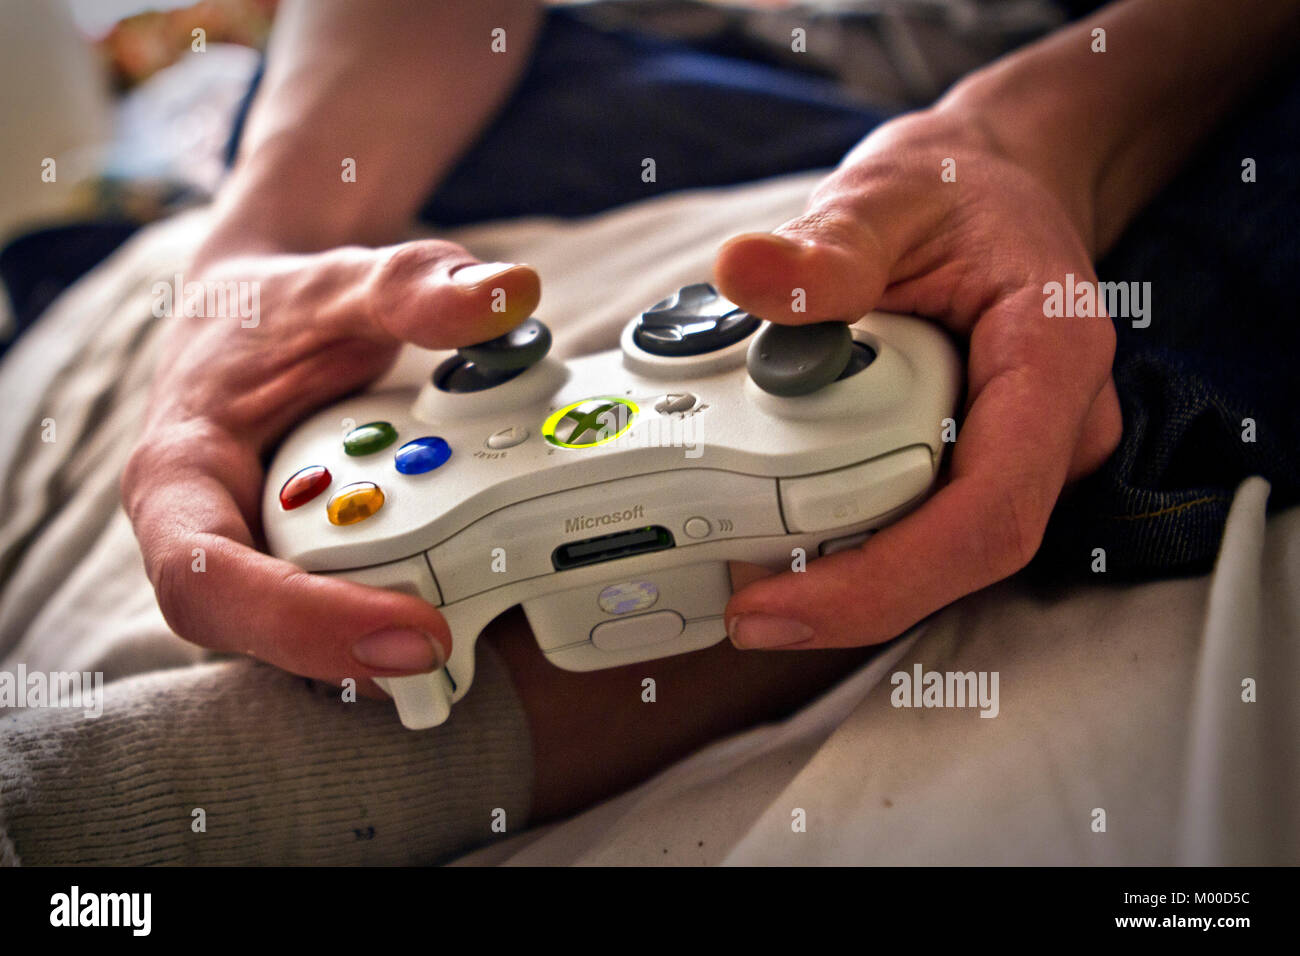 A young man plays a video game with his hands on a Xbox controller from the  American company Microsoft. Denmark 2012 Stock Photo - Alamy